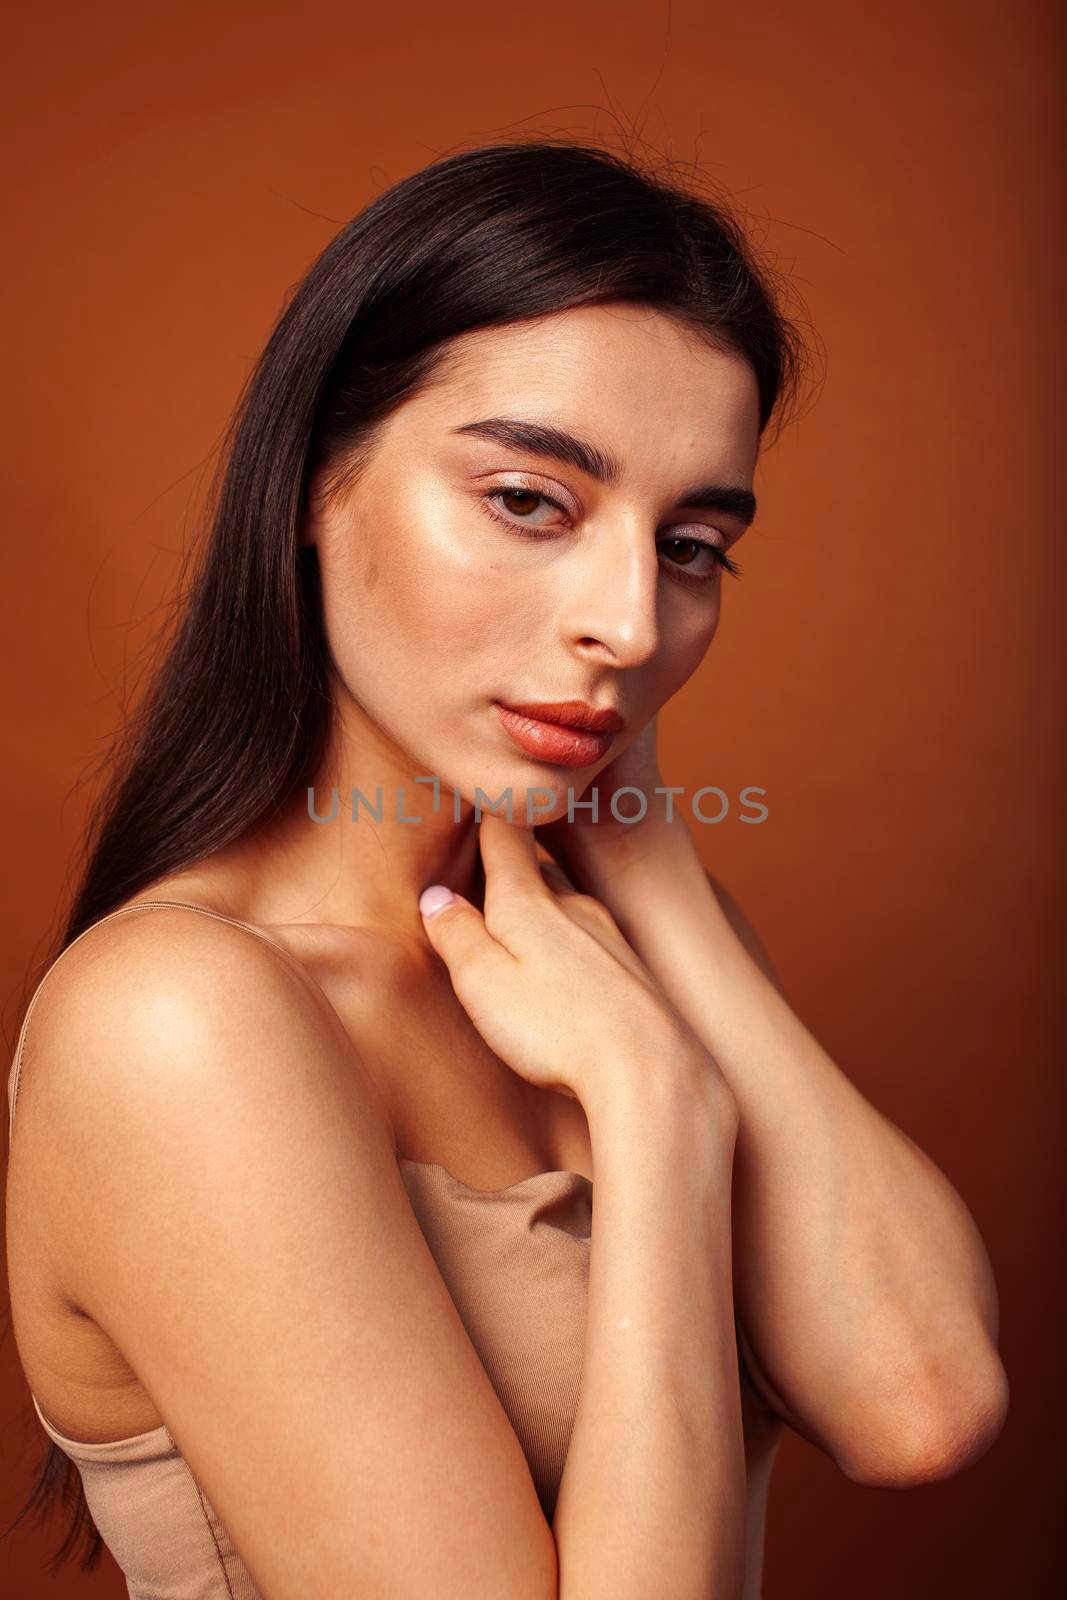 cute happy young indian woman in studio closeup smiling on brown background, fashion beauty lifestyle people concept by JordanJ